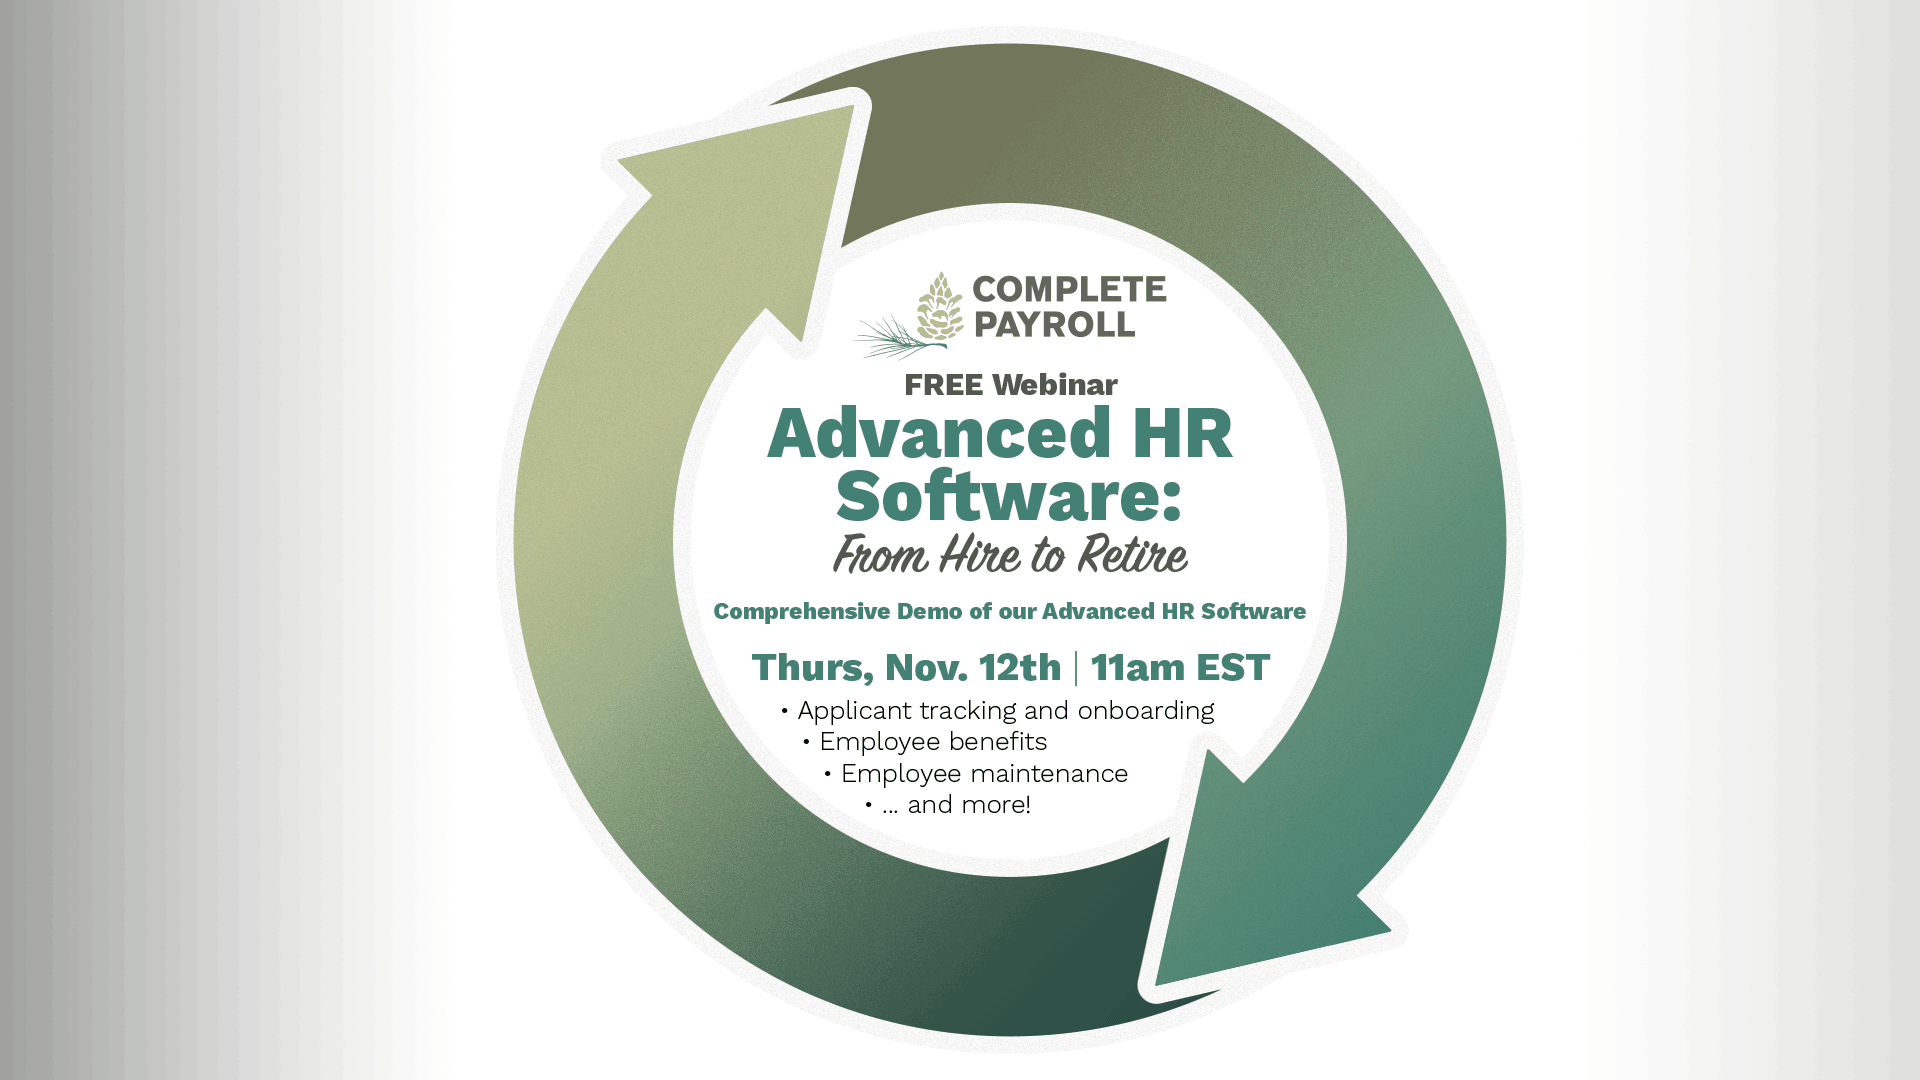 WEBINAR: Advanced HR Software: From Hire to Retire